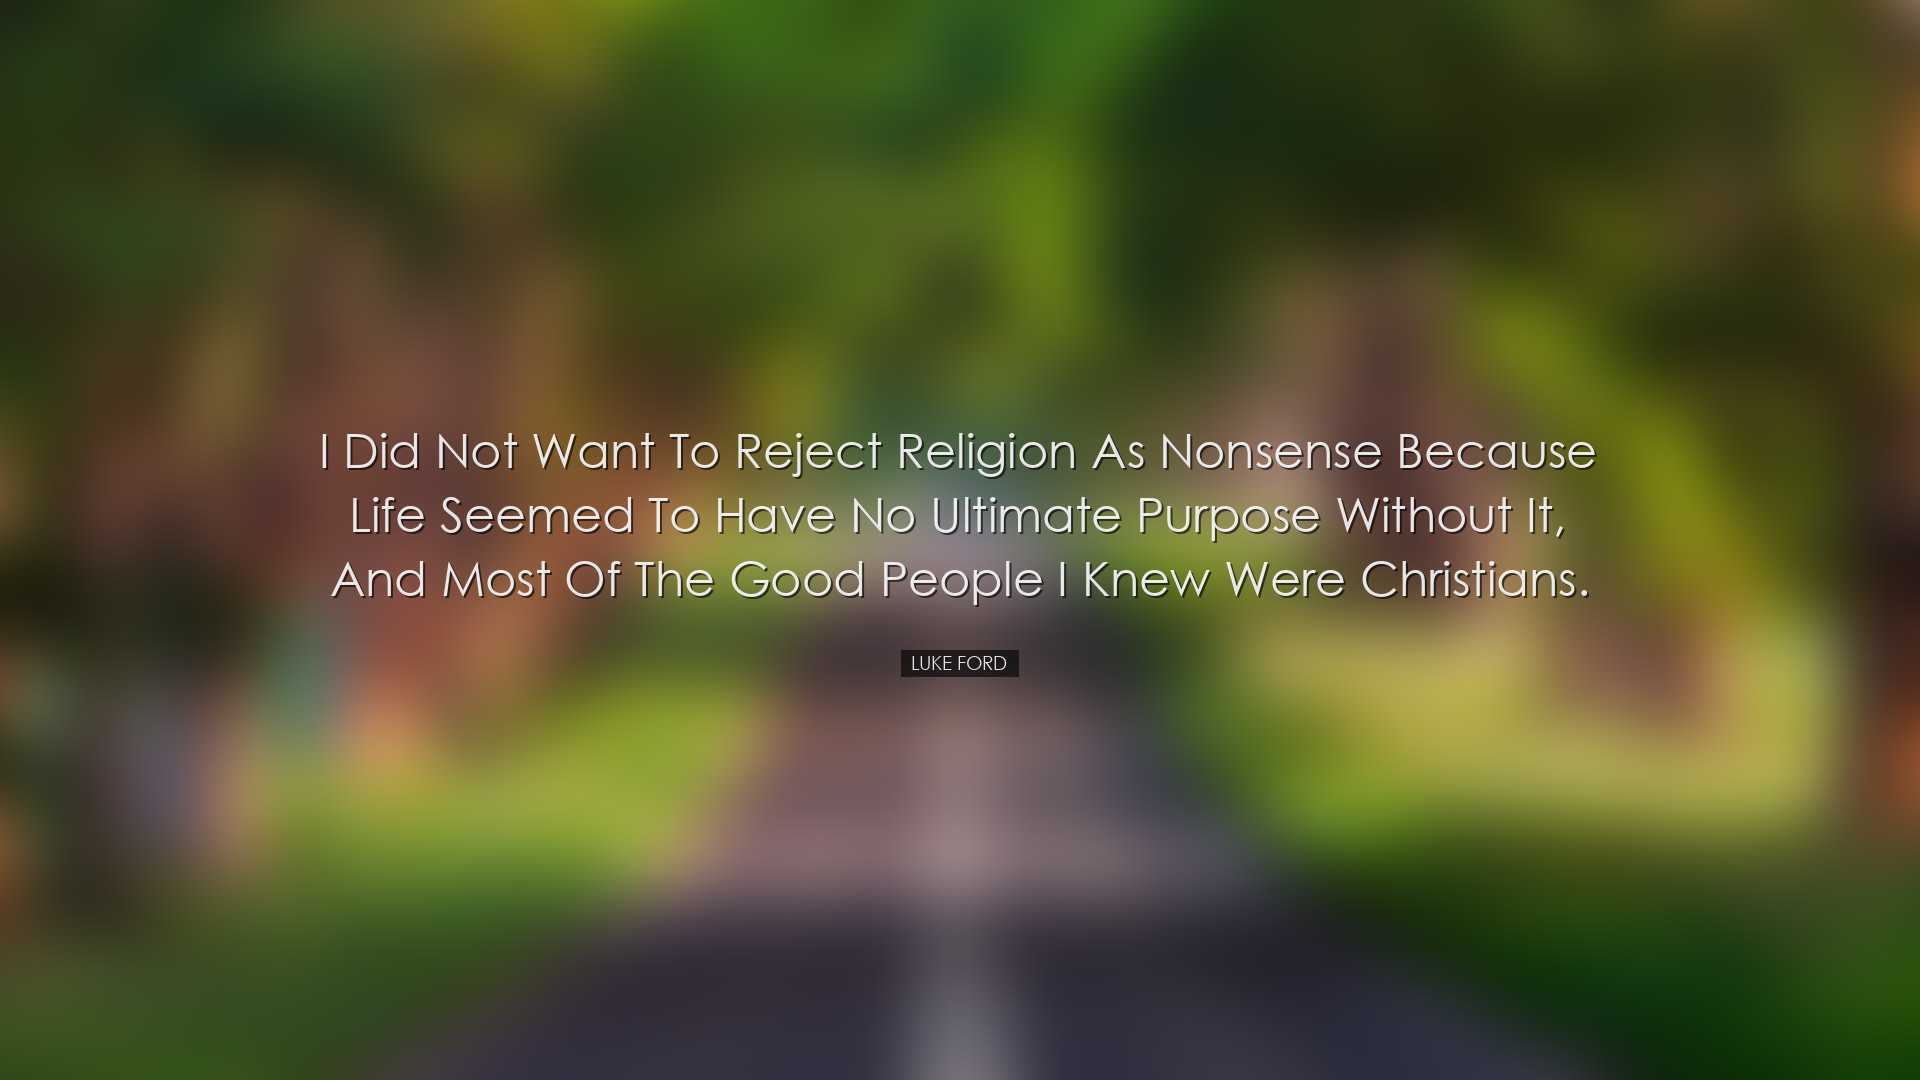 I did not want to reject religion as nonsense because life seemed